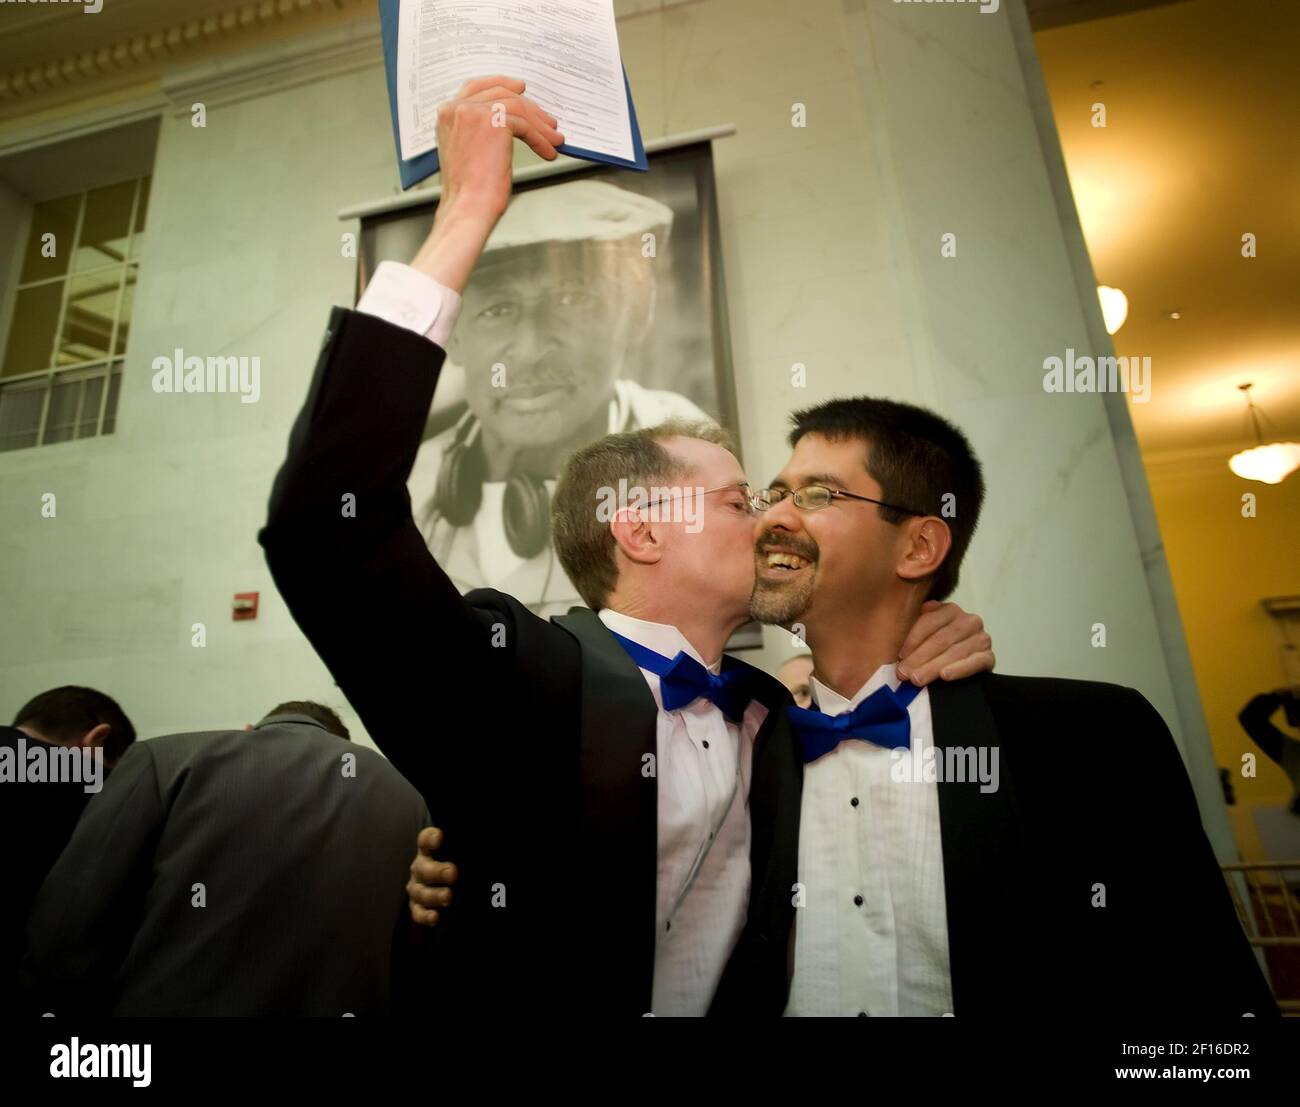 John Lewis, left, and Stuart Gaffney, of San Francisco, kiss as they hold up their marriage license inside the San Francisco City Hall, on the second day of legal gay marriages in California, Tuesday, June 17, 2008. The two were plaintiffs in the lawsuit that overturned the marriage ban. (Photo by Brian Baer/Sacramento Bee/MCT/Sipa USA) Stock Photo